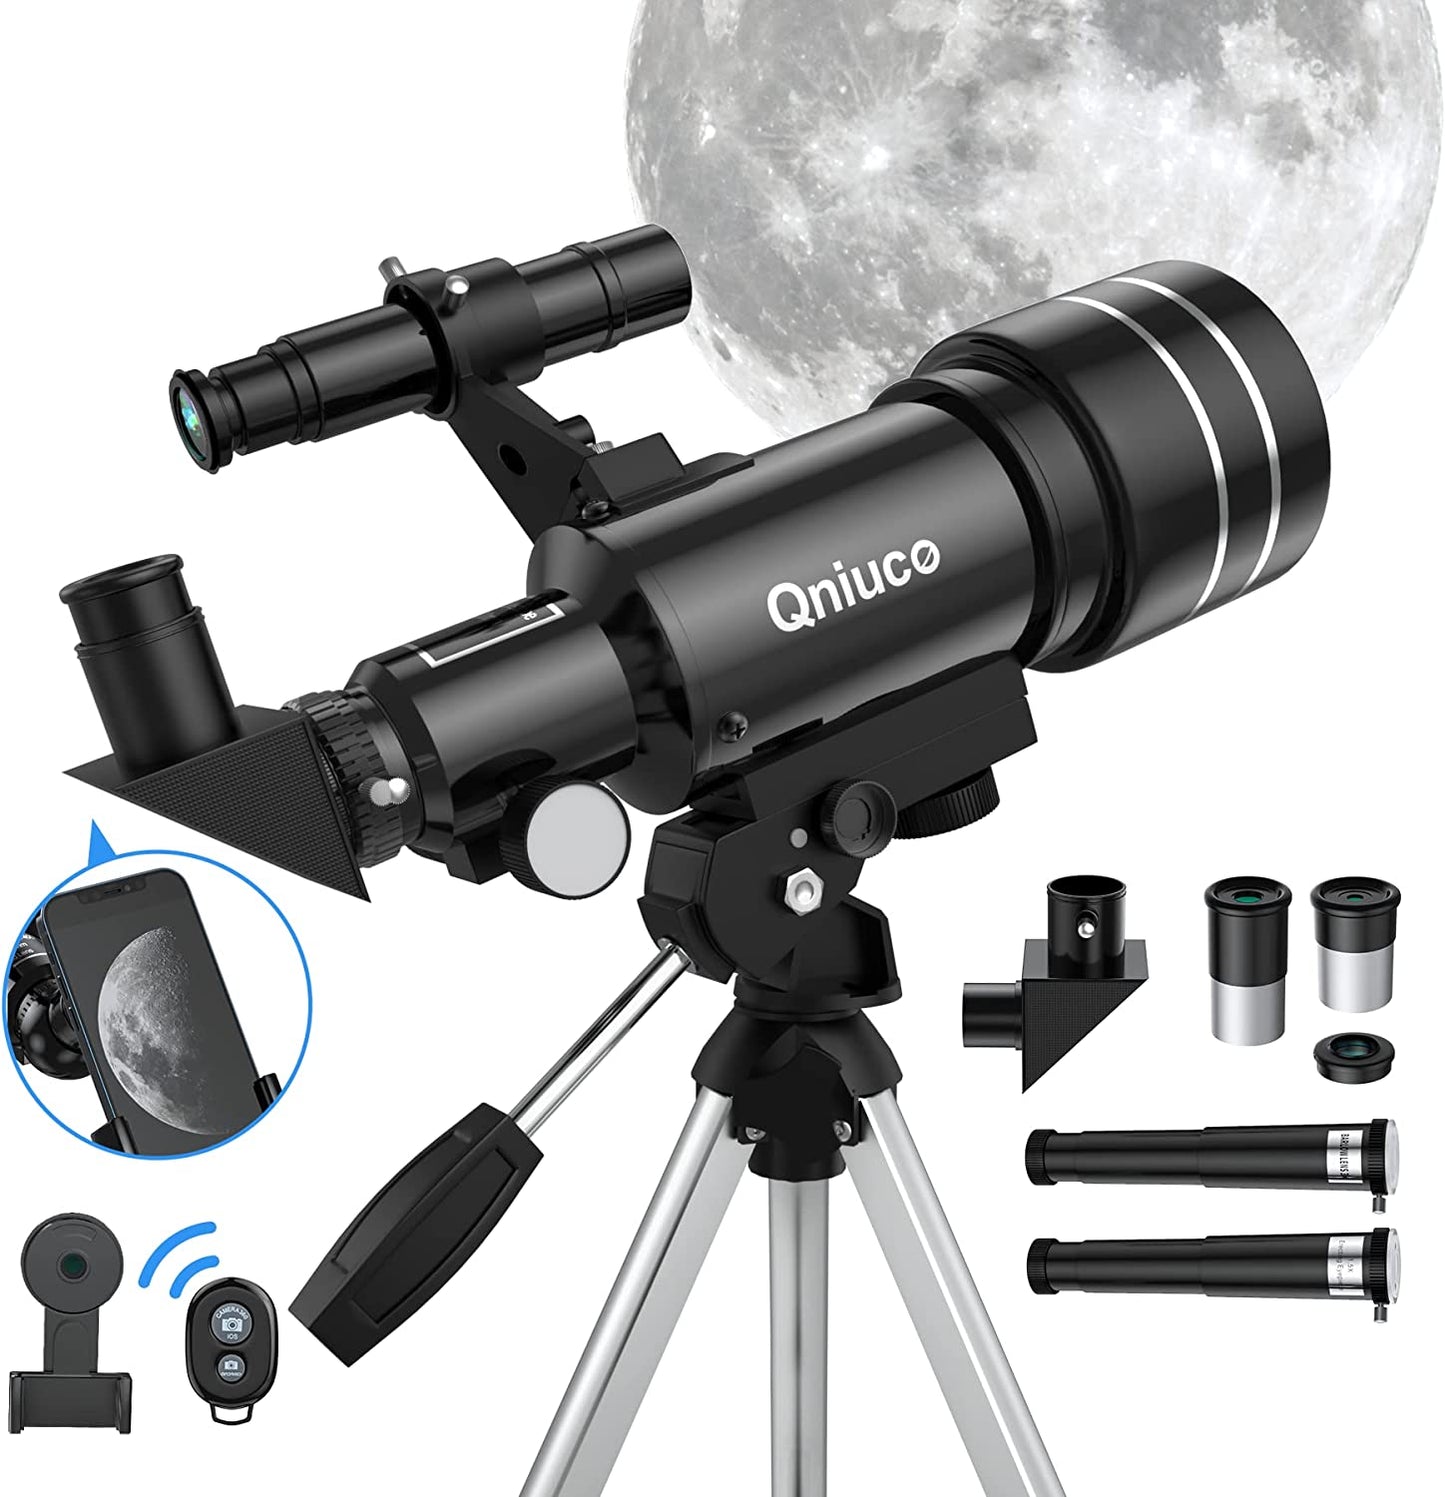 70mm Aperture Refractor Telescope for Astronomy Enthusiasts: Ideal for Kids, Adults, and Beginners. Includes Phone Adapter and Remote for Easy Portability and Astro-Photography. Perfect Astronomy Gift